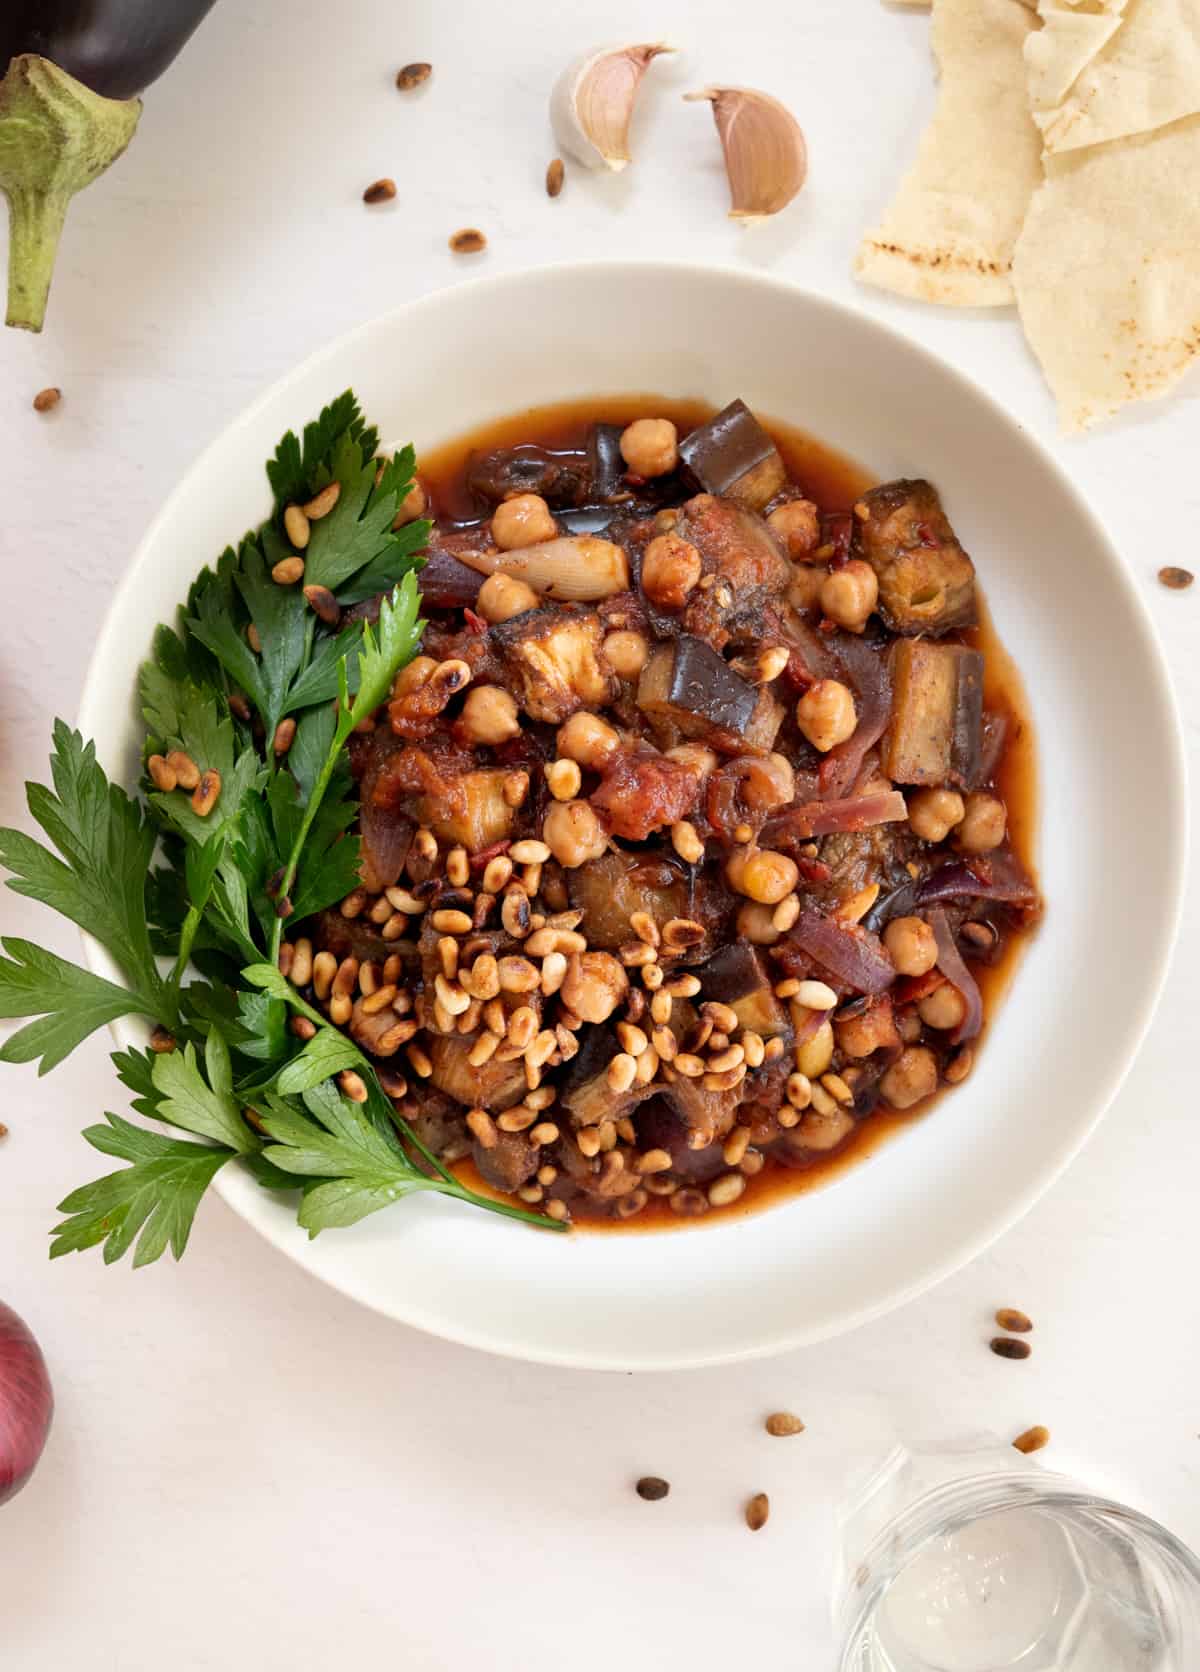 a white round bowl filled with cooked chickpeas and eggplant in a red sauce